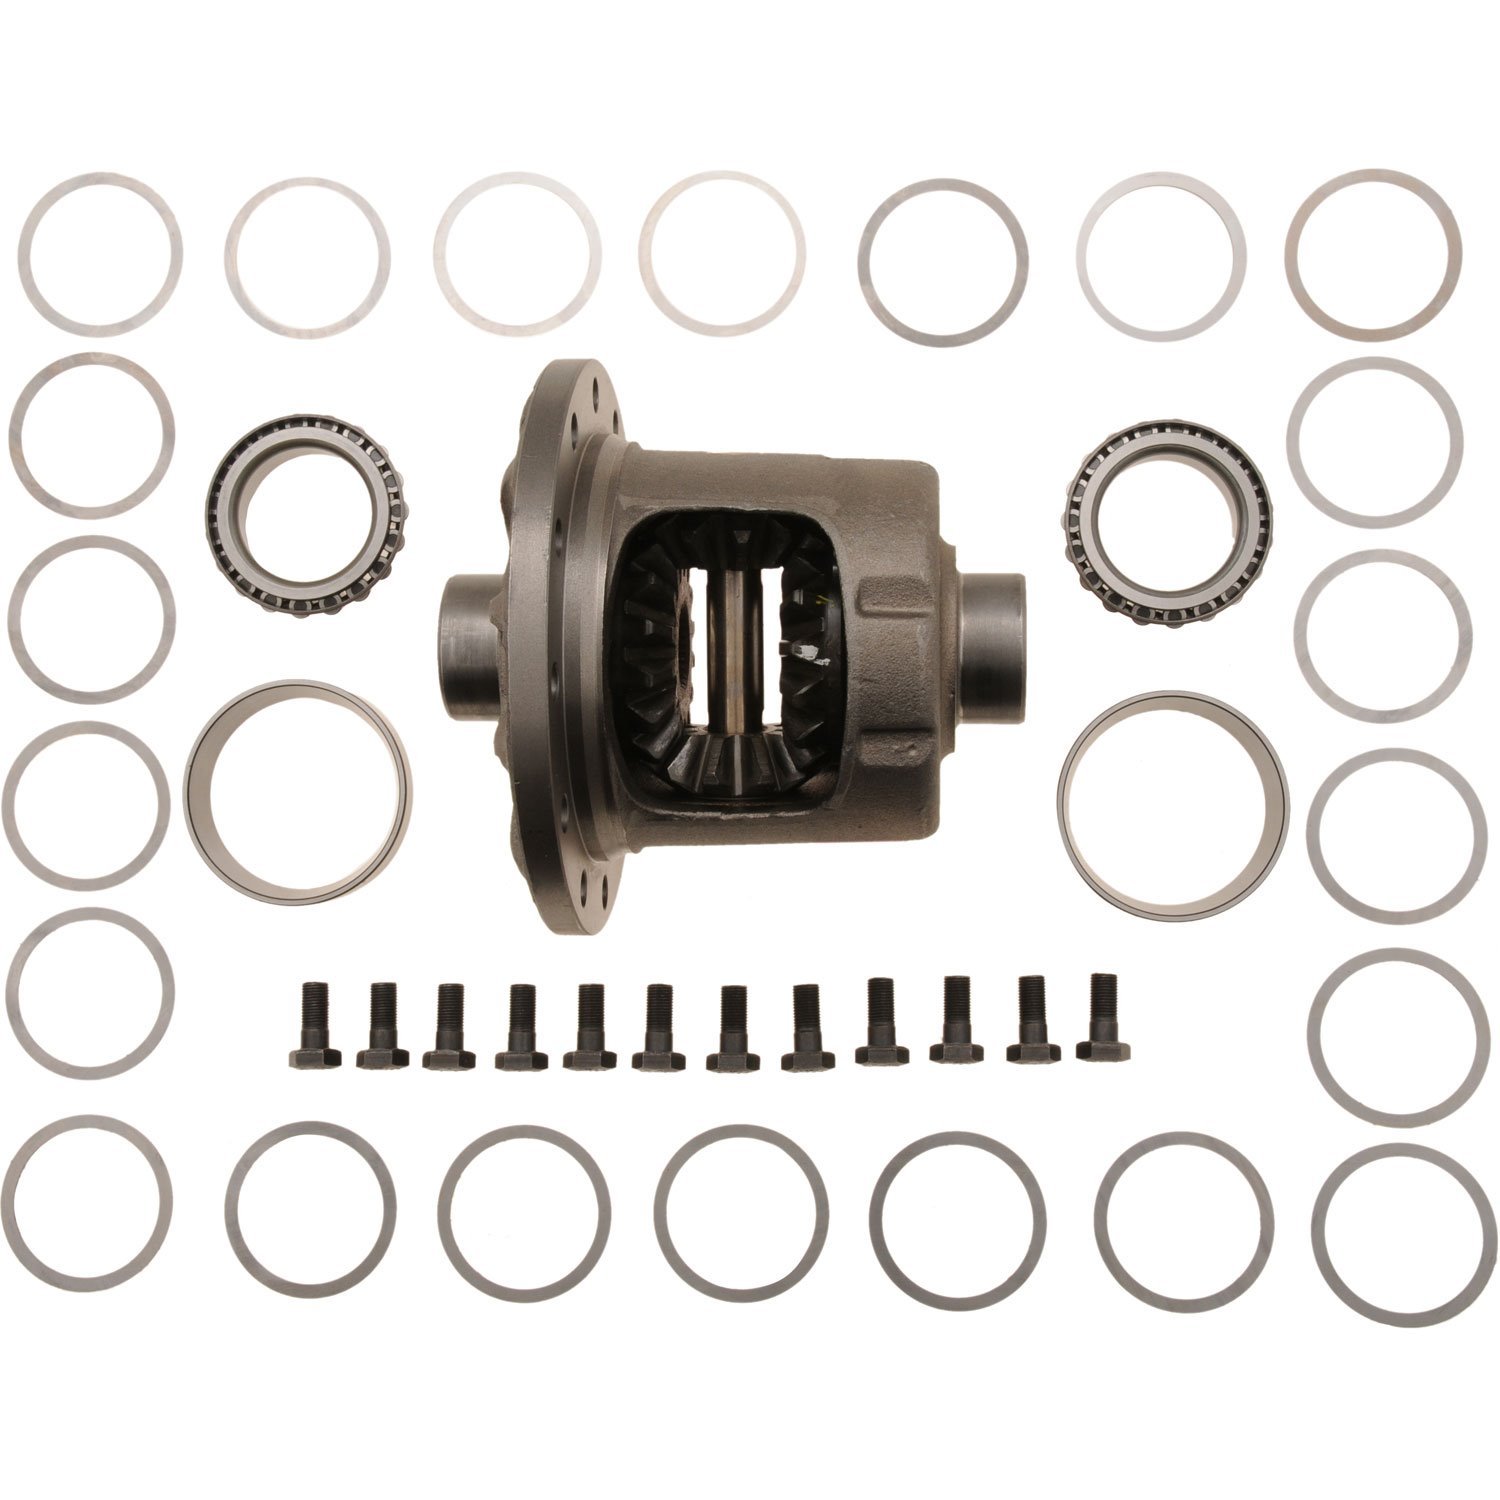 Trac-Loc Limited Slip Differential Assembly Fits: Dana 60 Rear